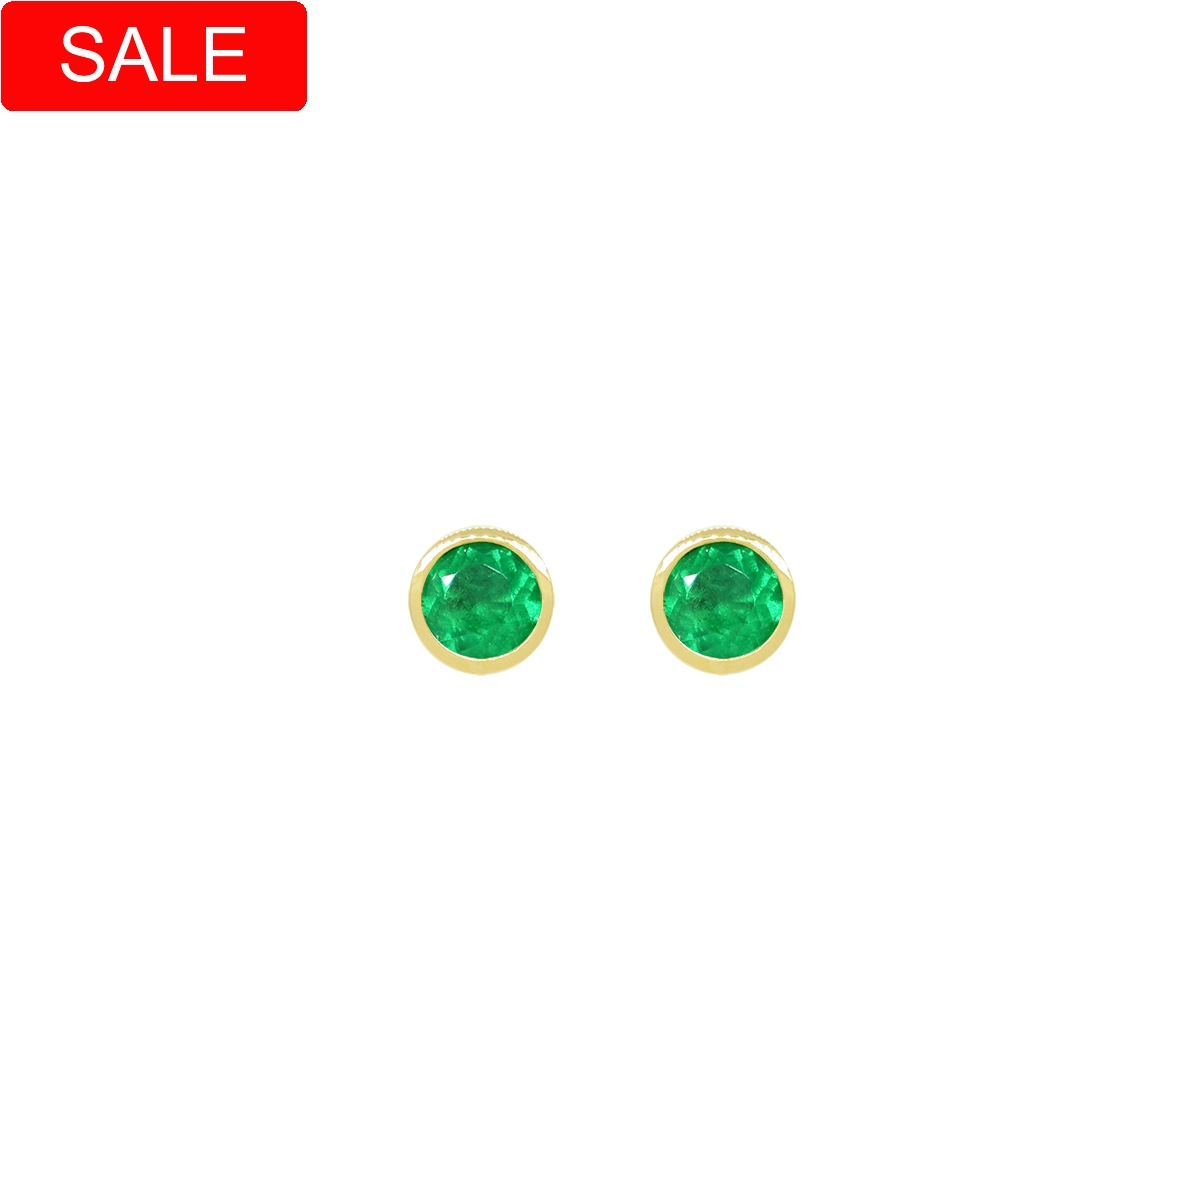 Small stud emerald earrings in 18K yellow gold classic bezel setting with 2 real Colombian emeralds